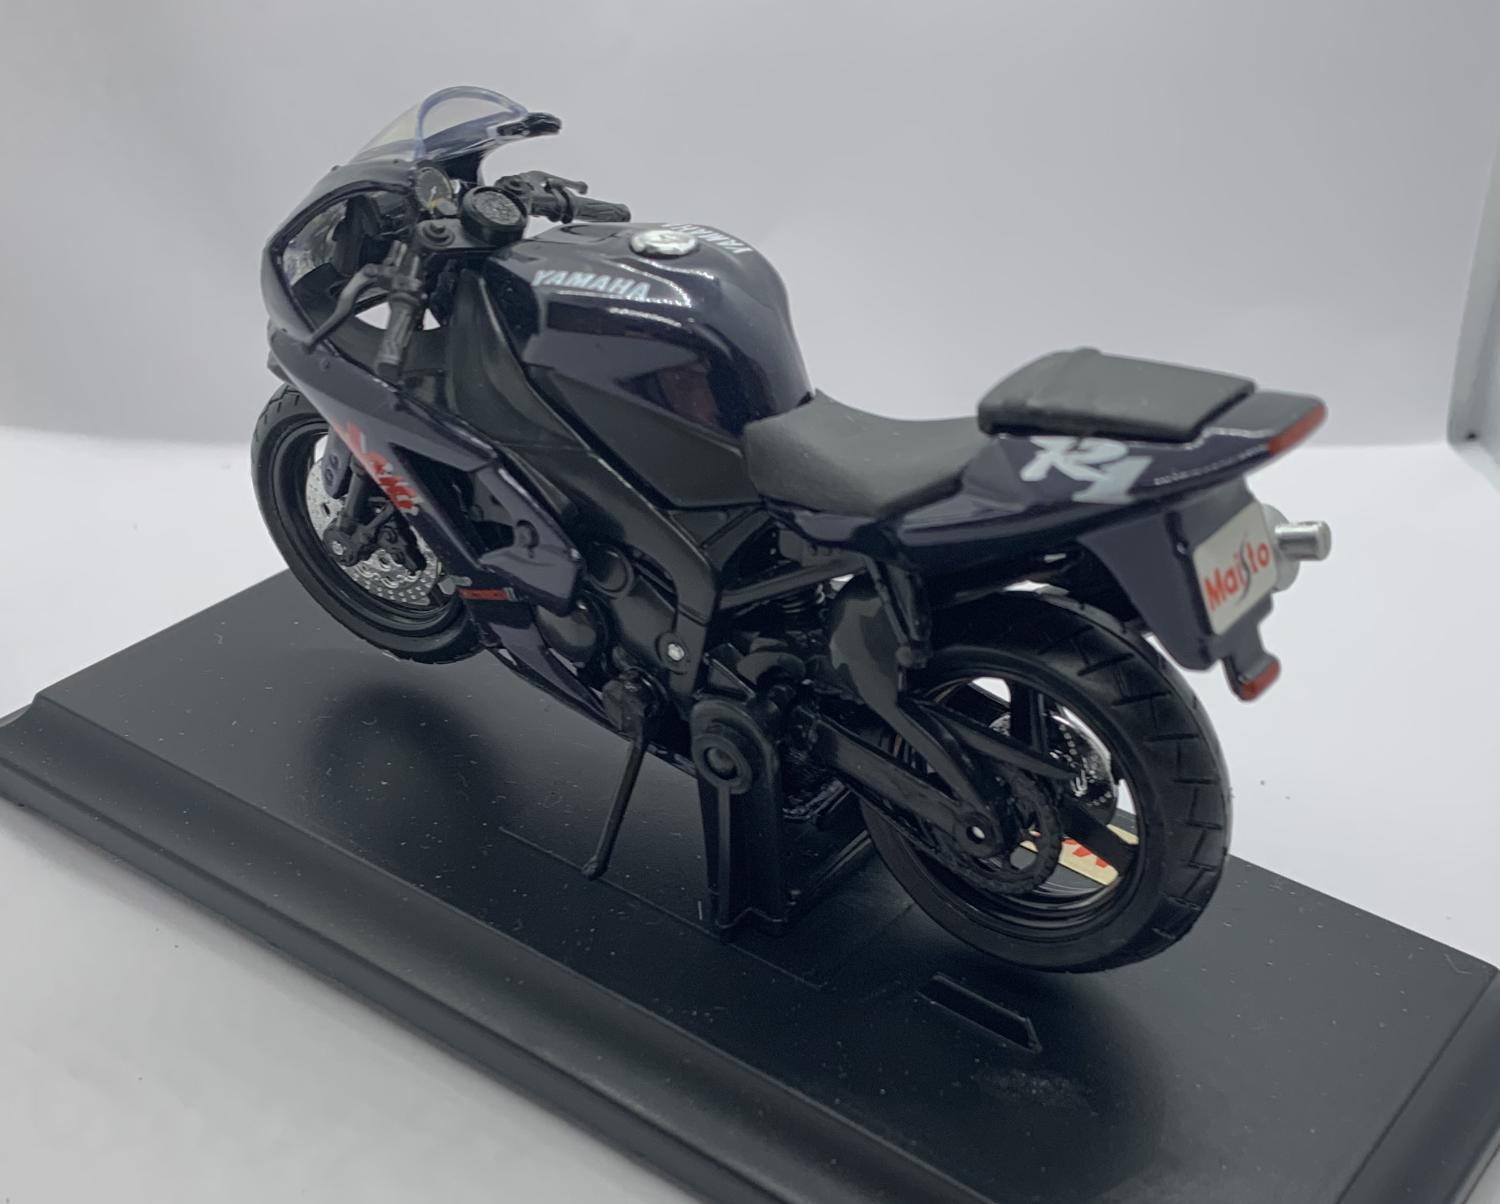 Yamaha YZF R1 1:18 scale motorbike model in deep blue from Maisto